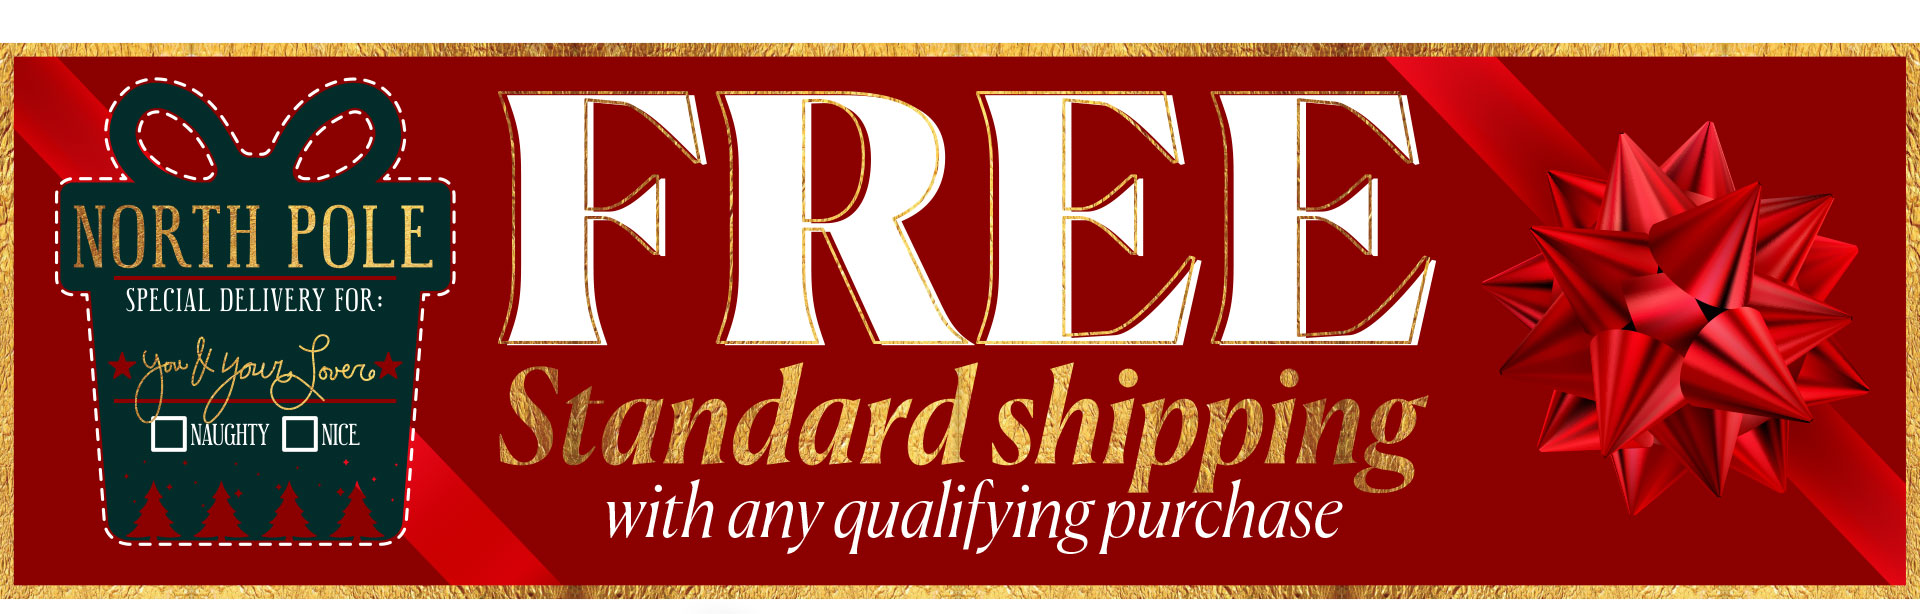 Free Standard Shipping on all qualifying orders! - Learn More